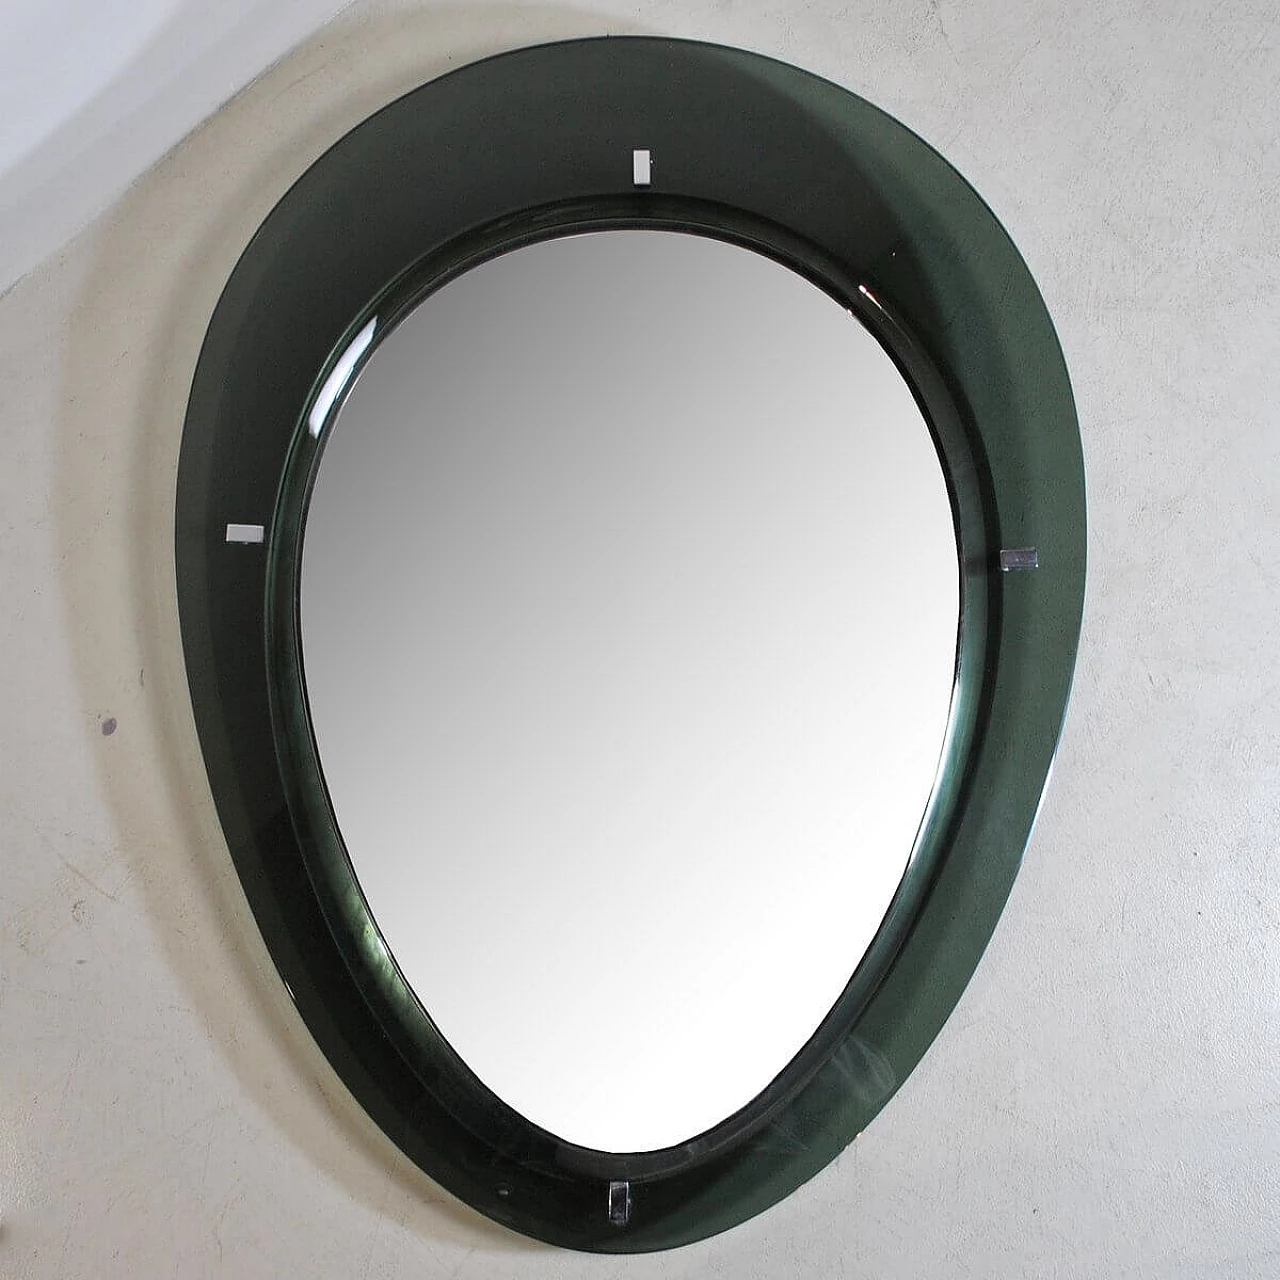 Cristal Art mirror with glass frame, 1950s 1376928